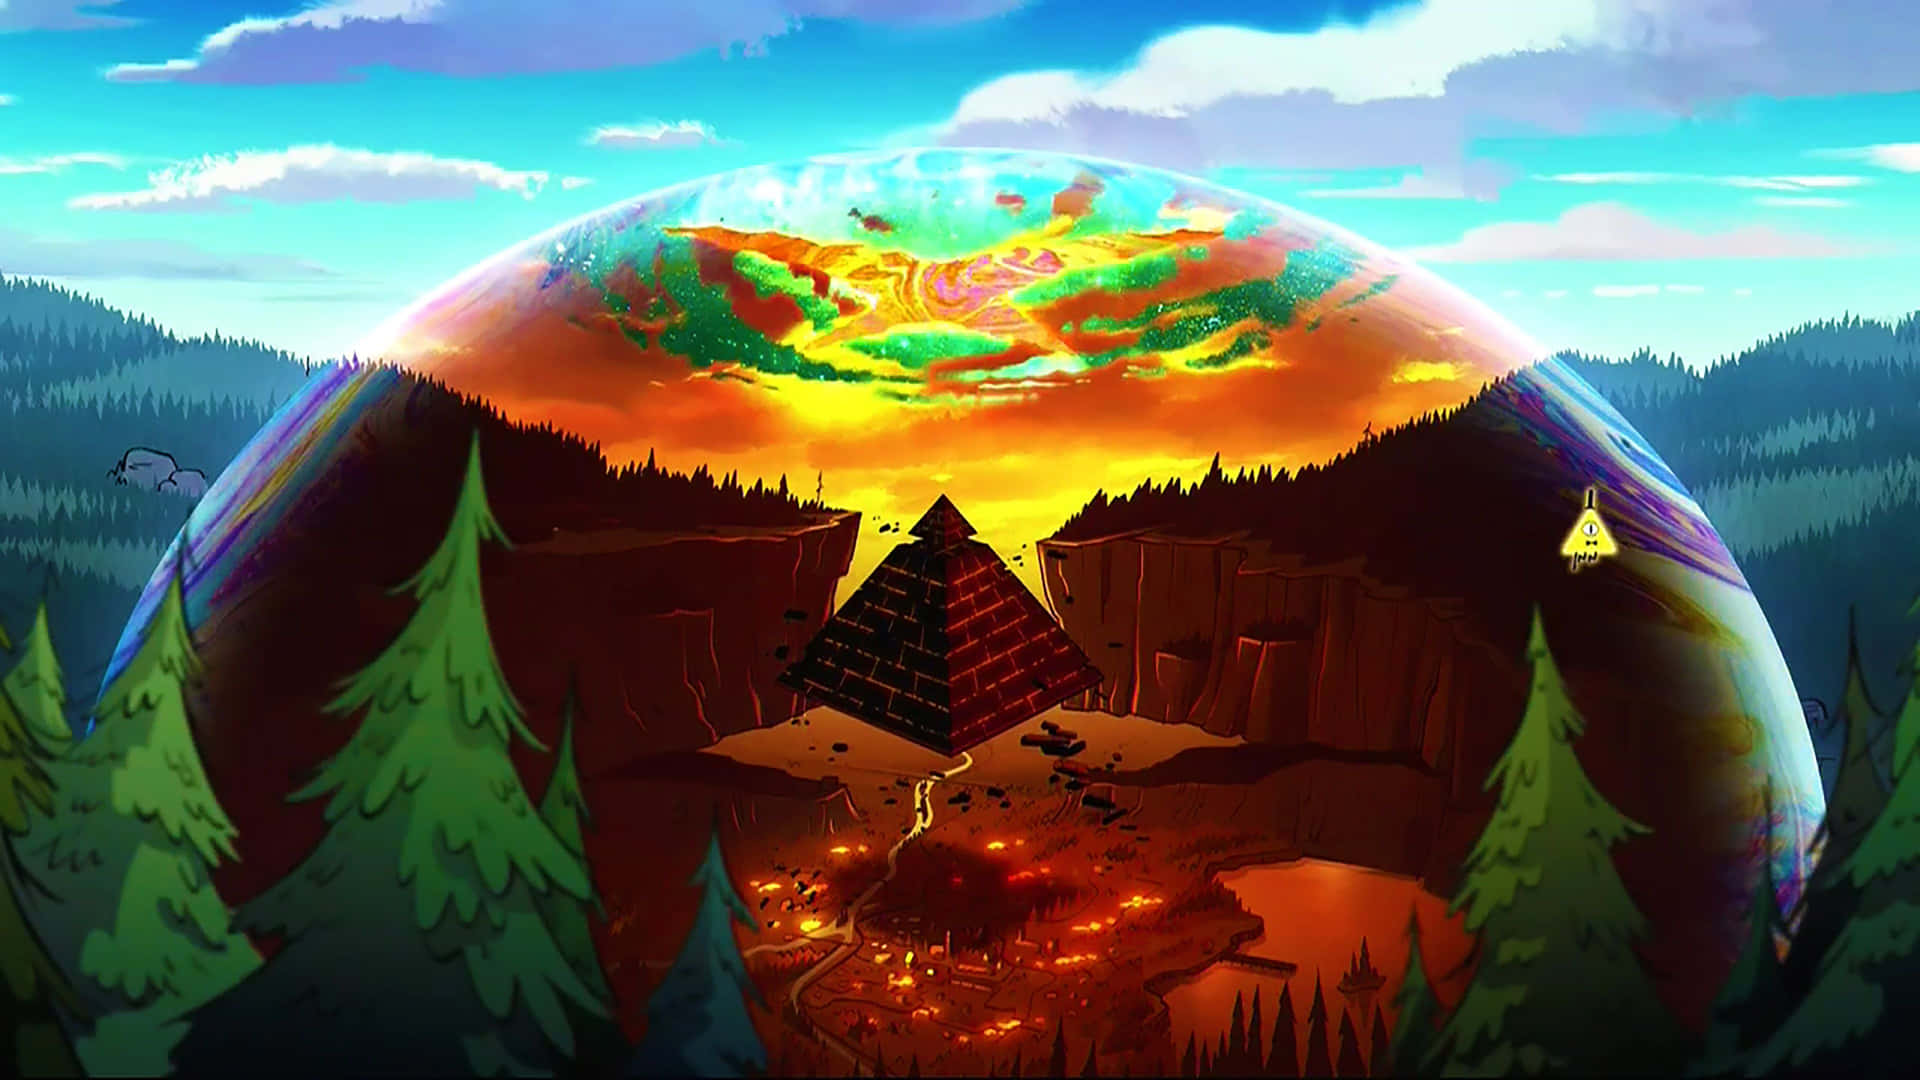 Experience adventures in Gravity Falls